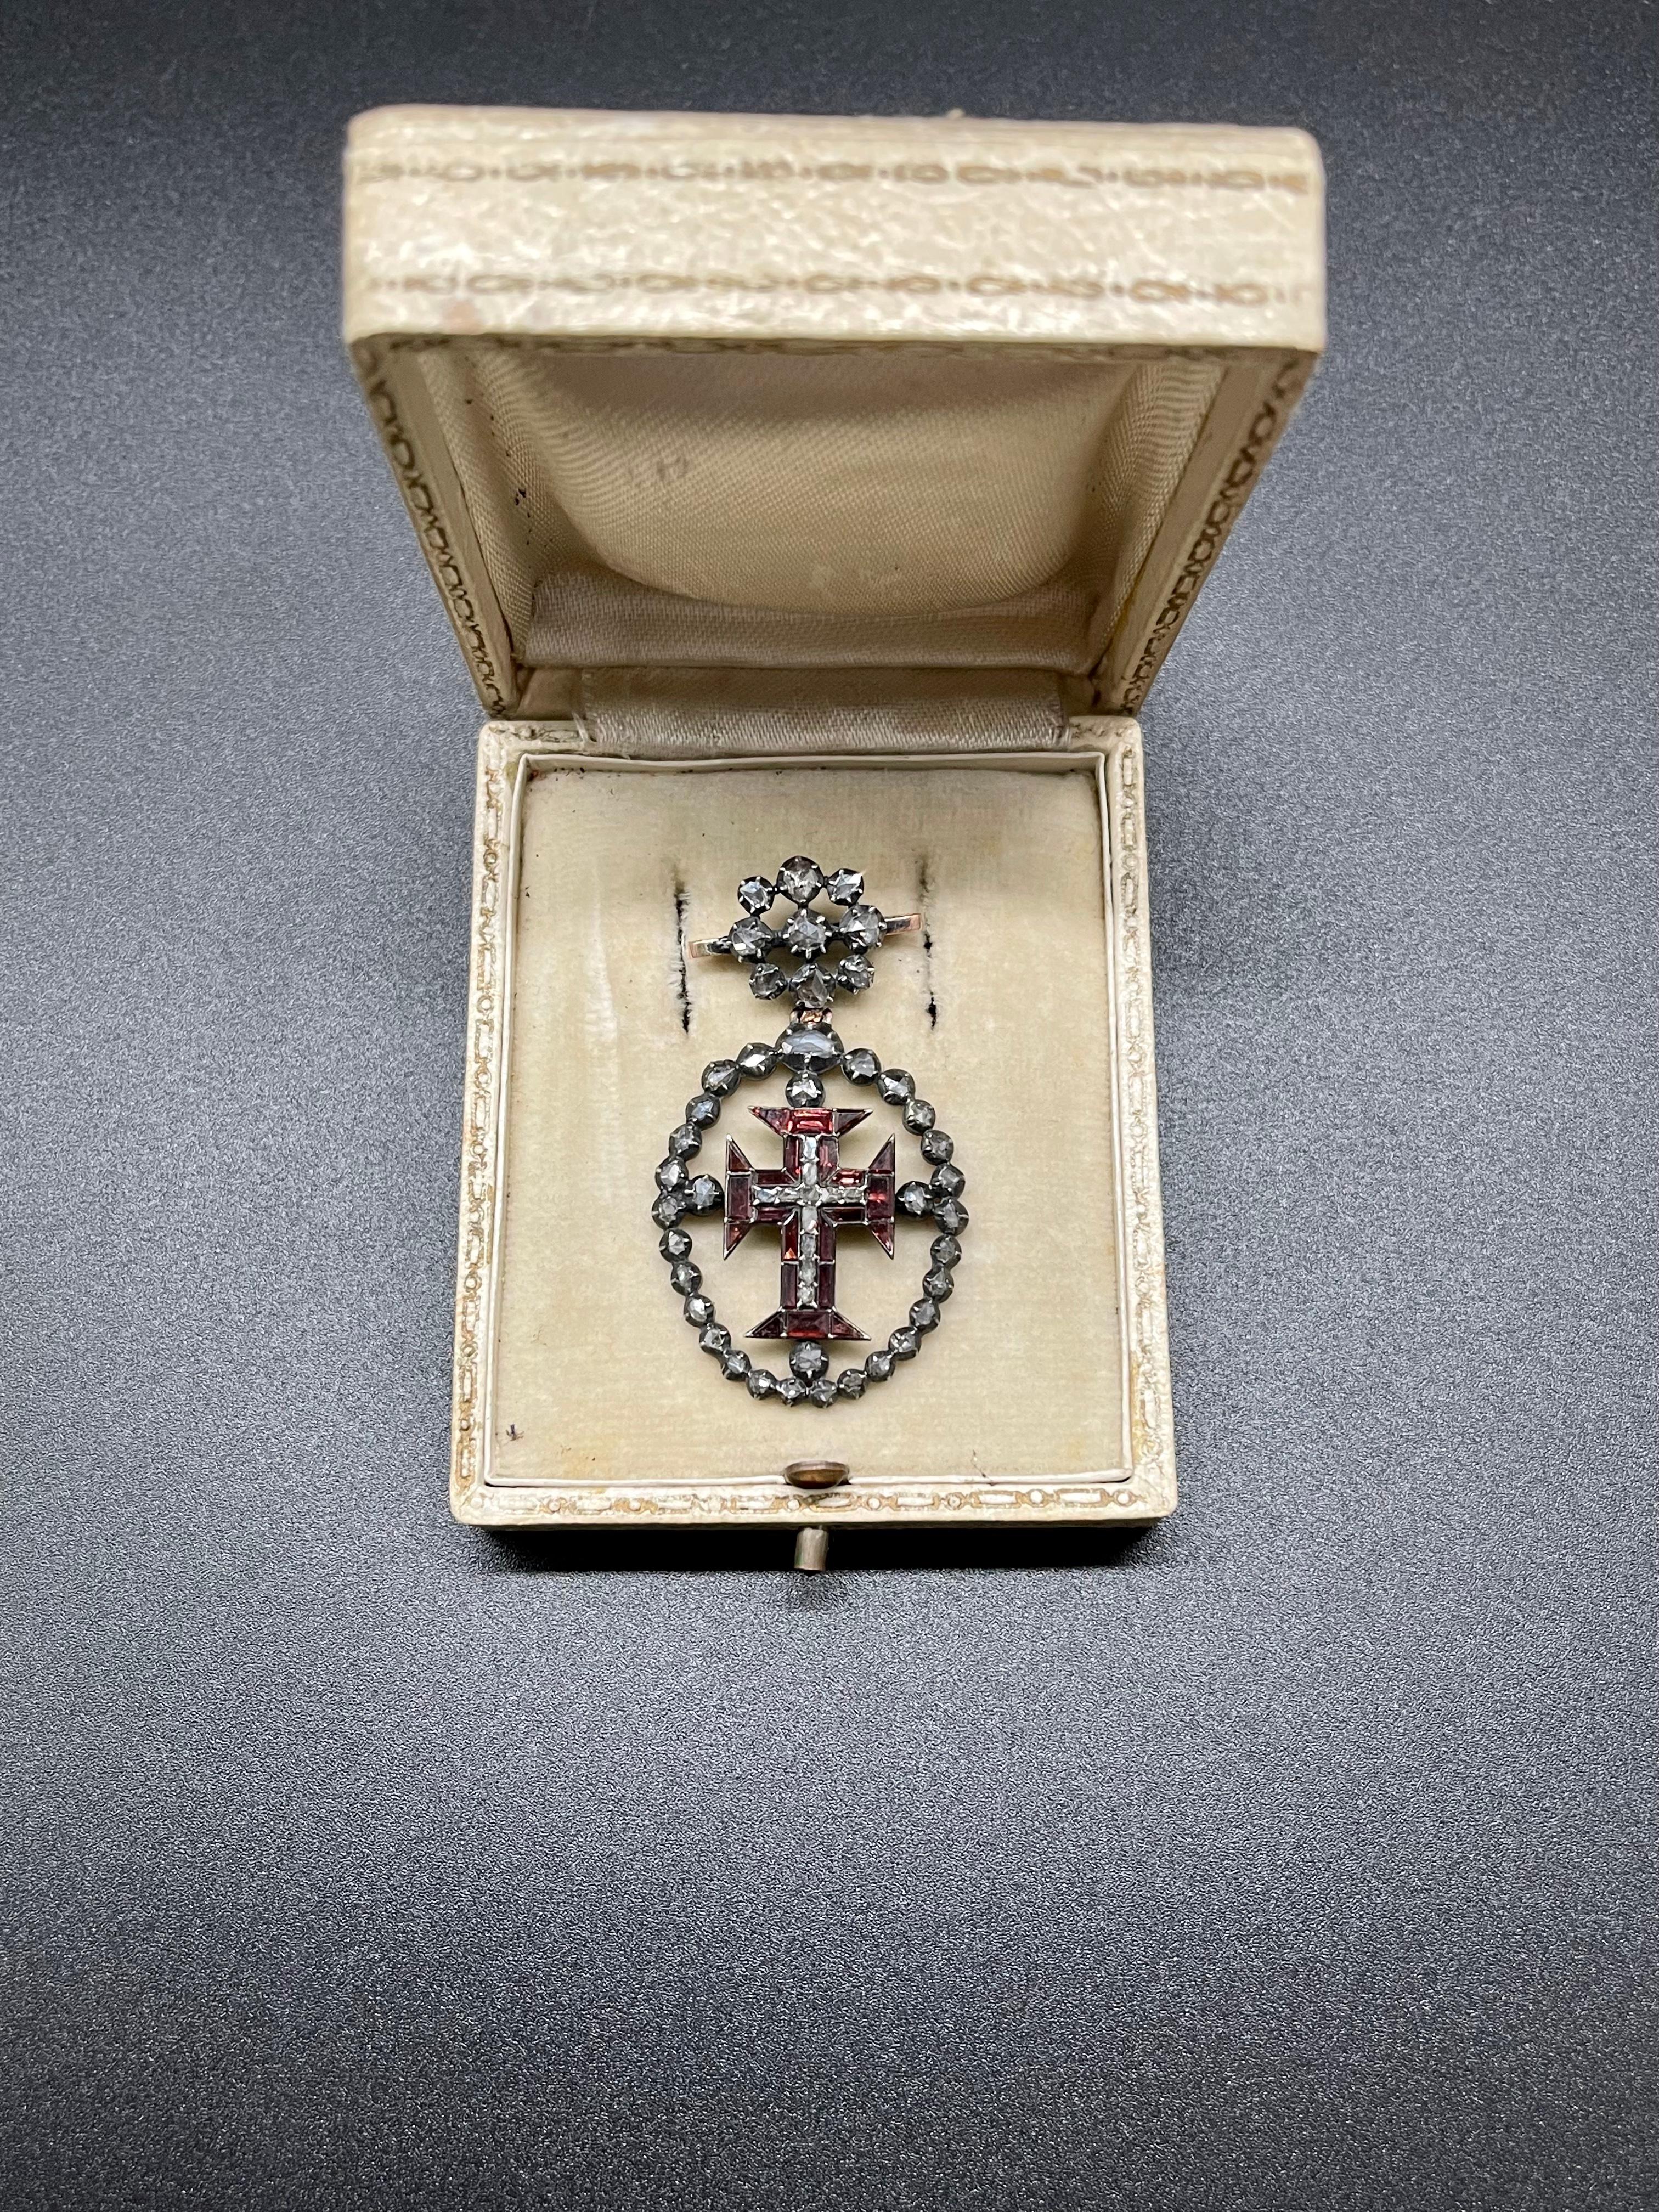 A Magnificent and very Rare, Museum Quality Seventeenth Century (1600s) Grand Cross of the Portuguese Military Order of Christ, the new face of the Templar Order.

This Unique Grand Cross is made of Silver and Gold Alloy typical of the period and is